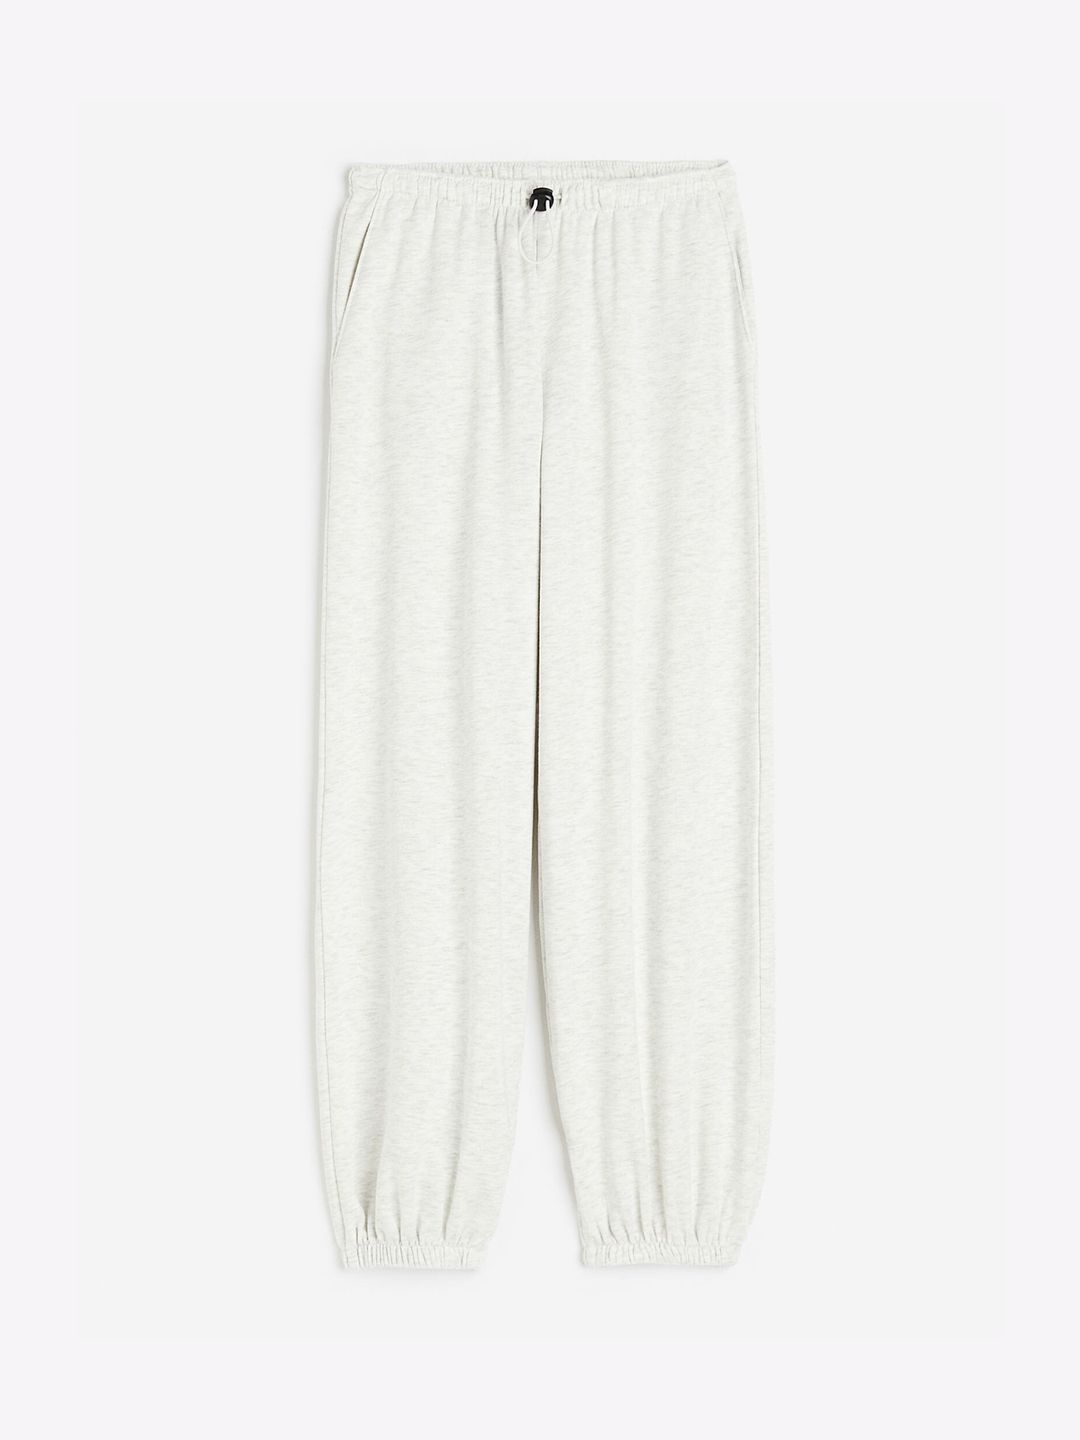 H&M Women Joggers Price in India